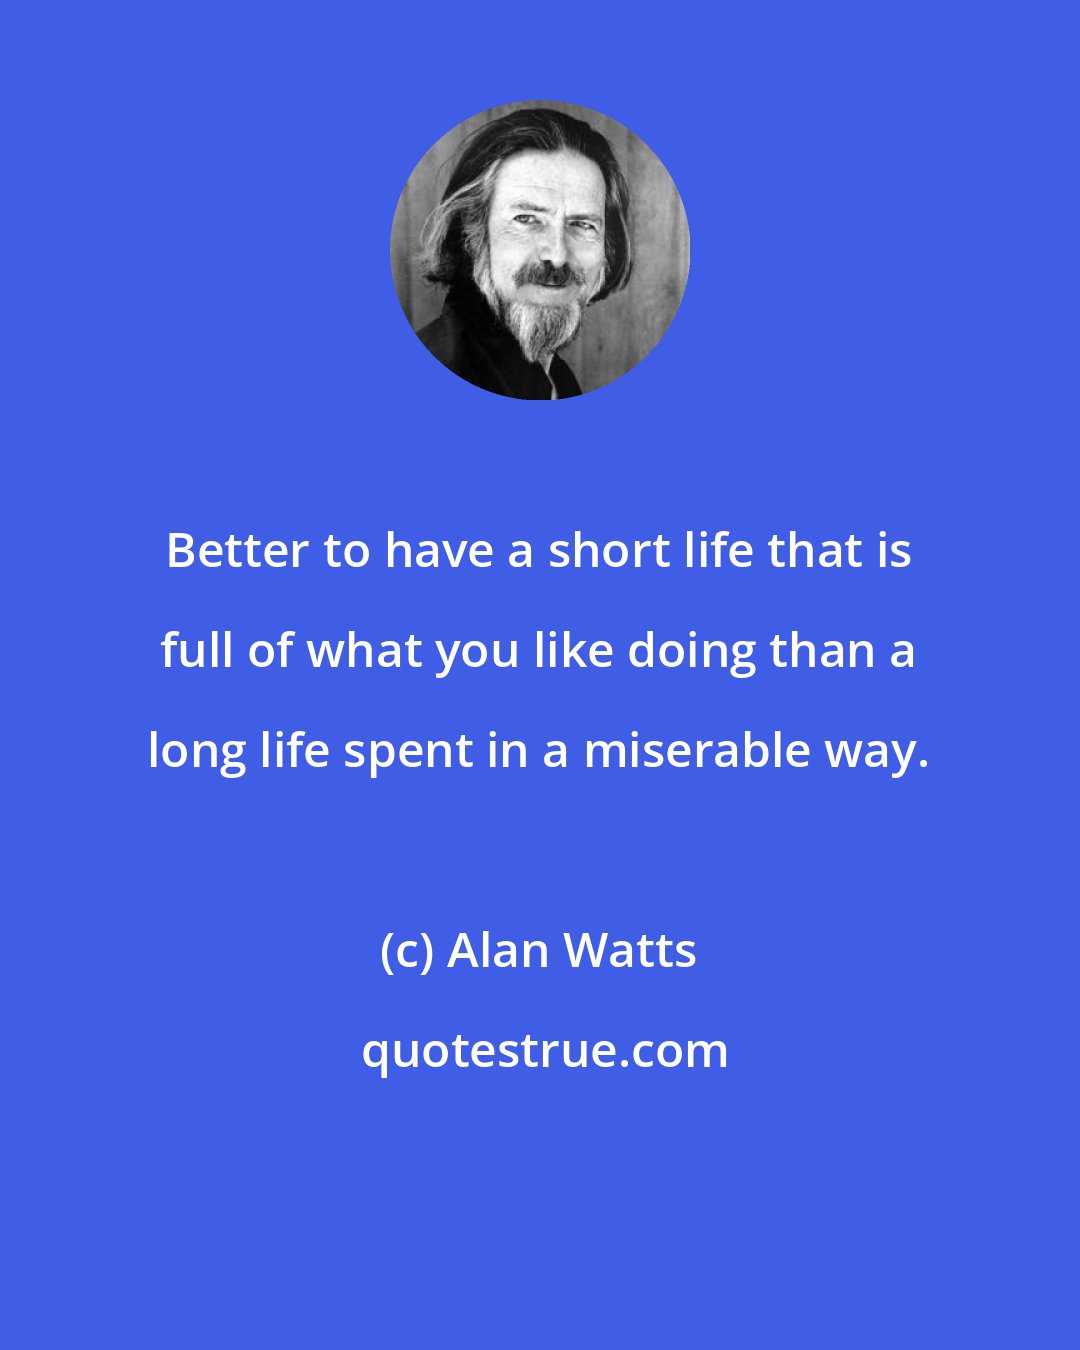 Alan Watts: Better to have a short life that is full of what you like doing than a long life spent in a miserable way.